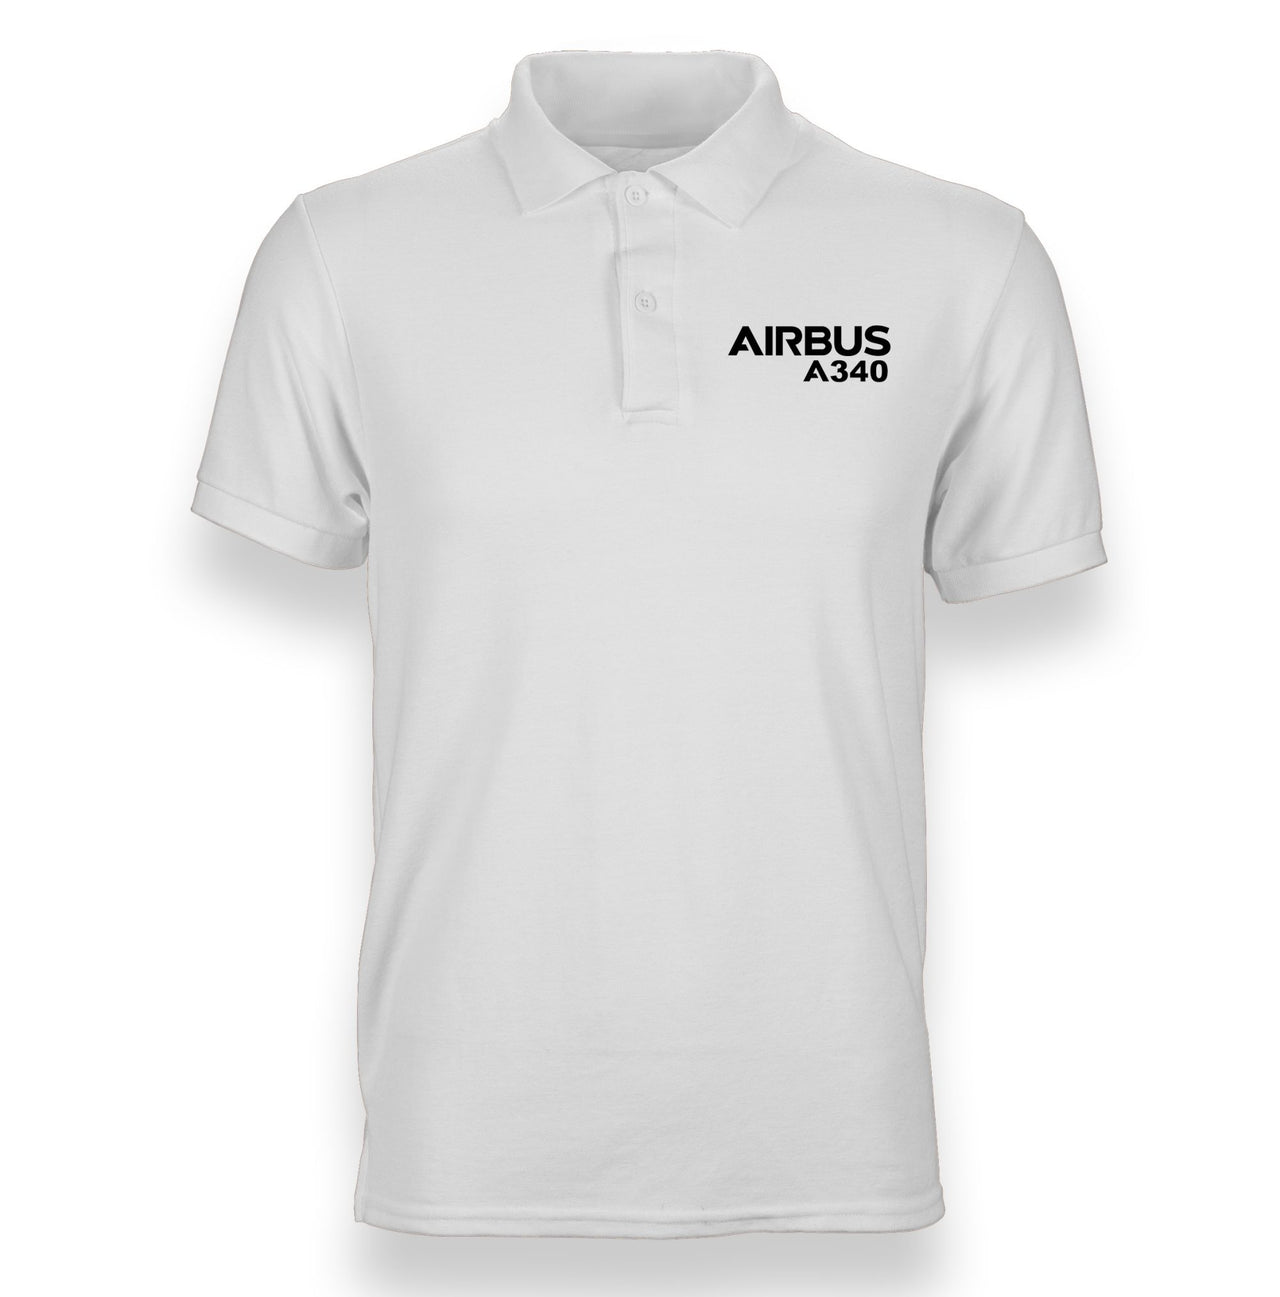 Airbus A340 & Text Designed "WOMEN" Polo T-Shirts